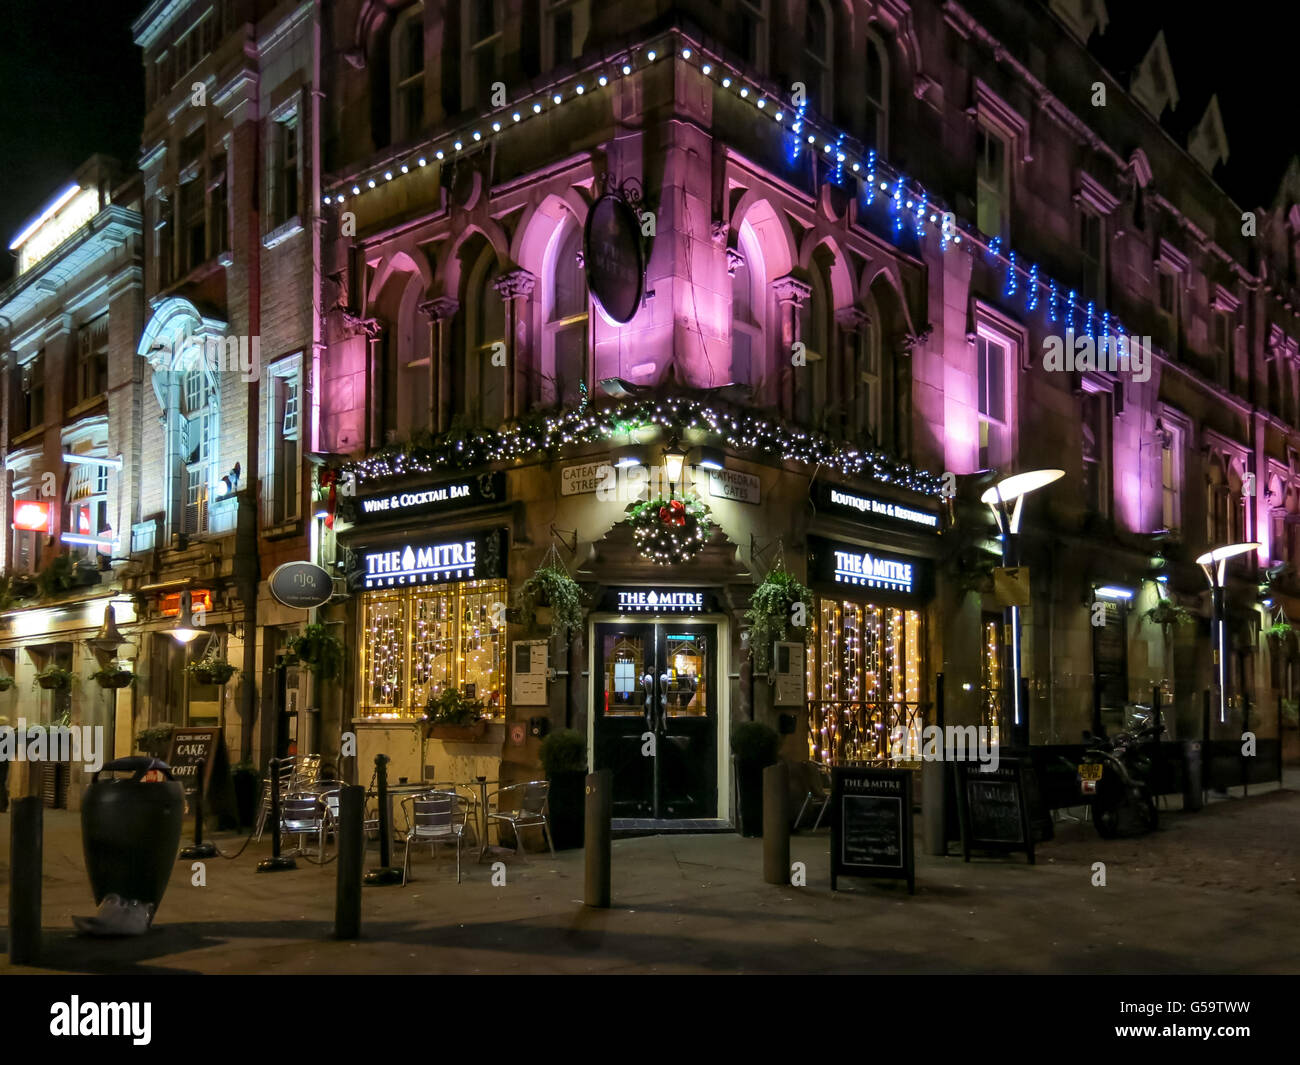 The Mitre Bar at Shambles Square by night in the city centre of Manchester, England, UK Stock Photo